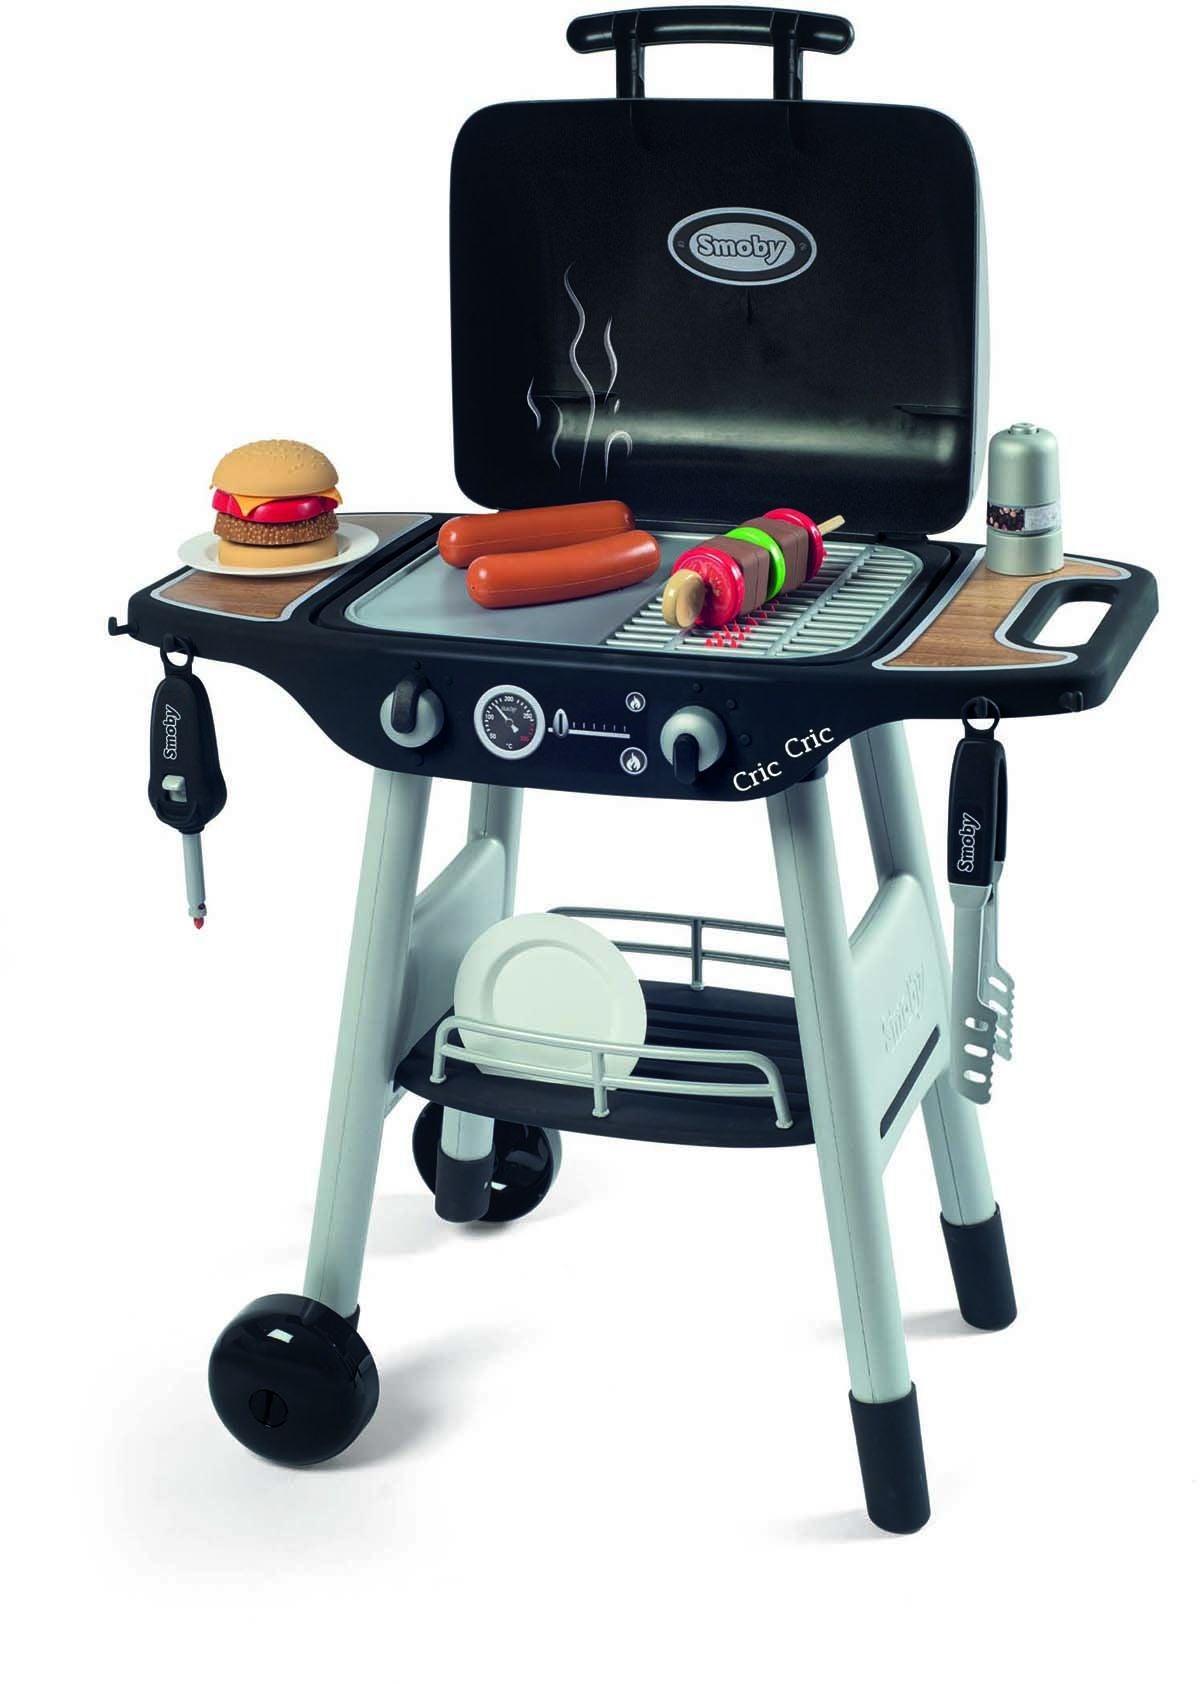 Smoby Grill Barbecue von Smoby